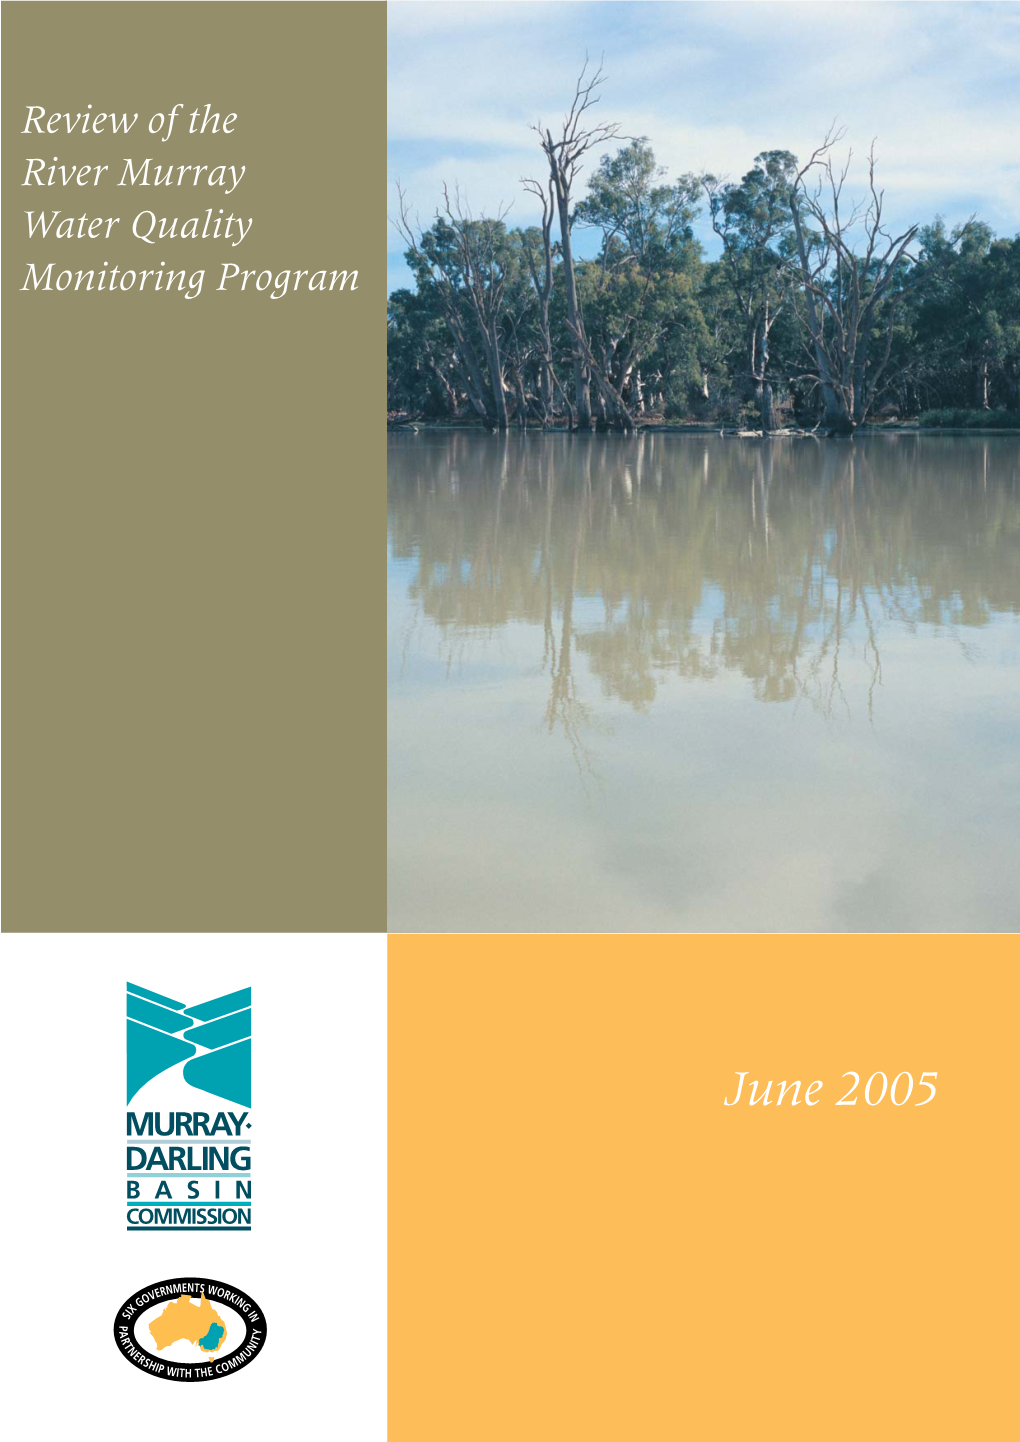 Review of the River Murray Water Quality Monitoring Program June